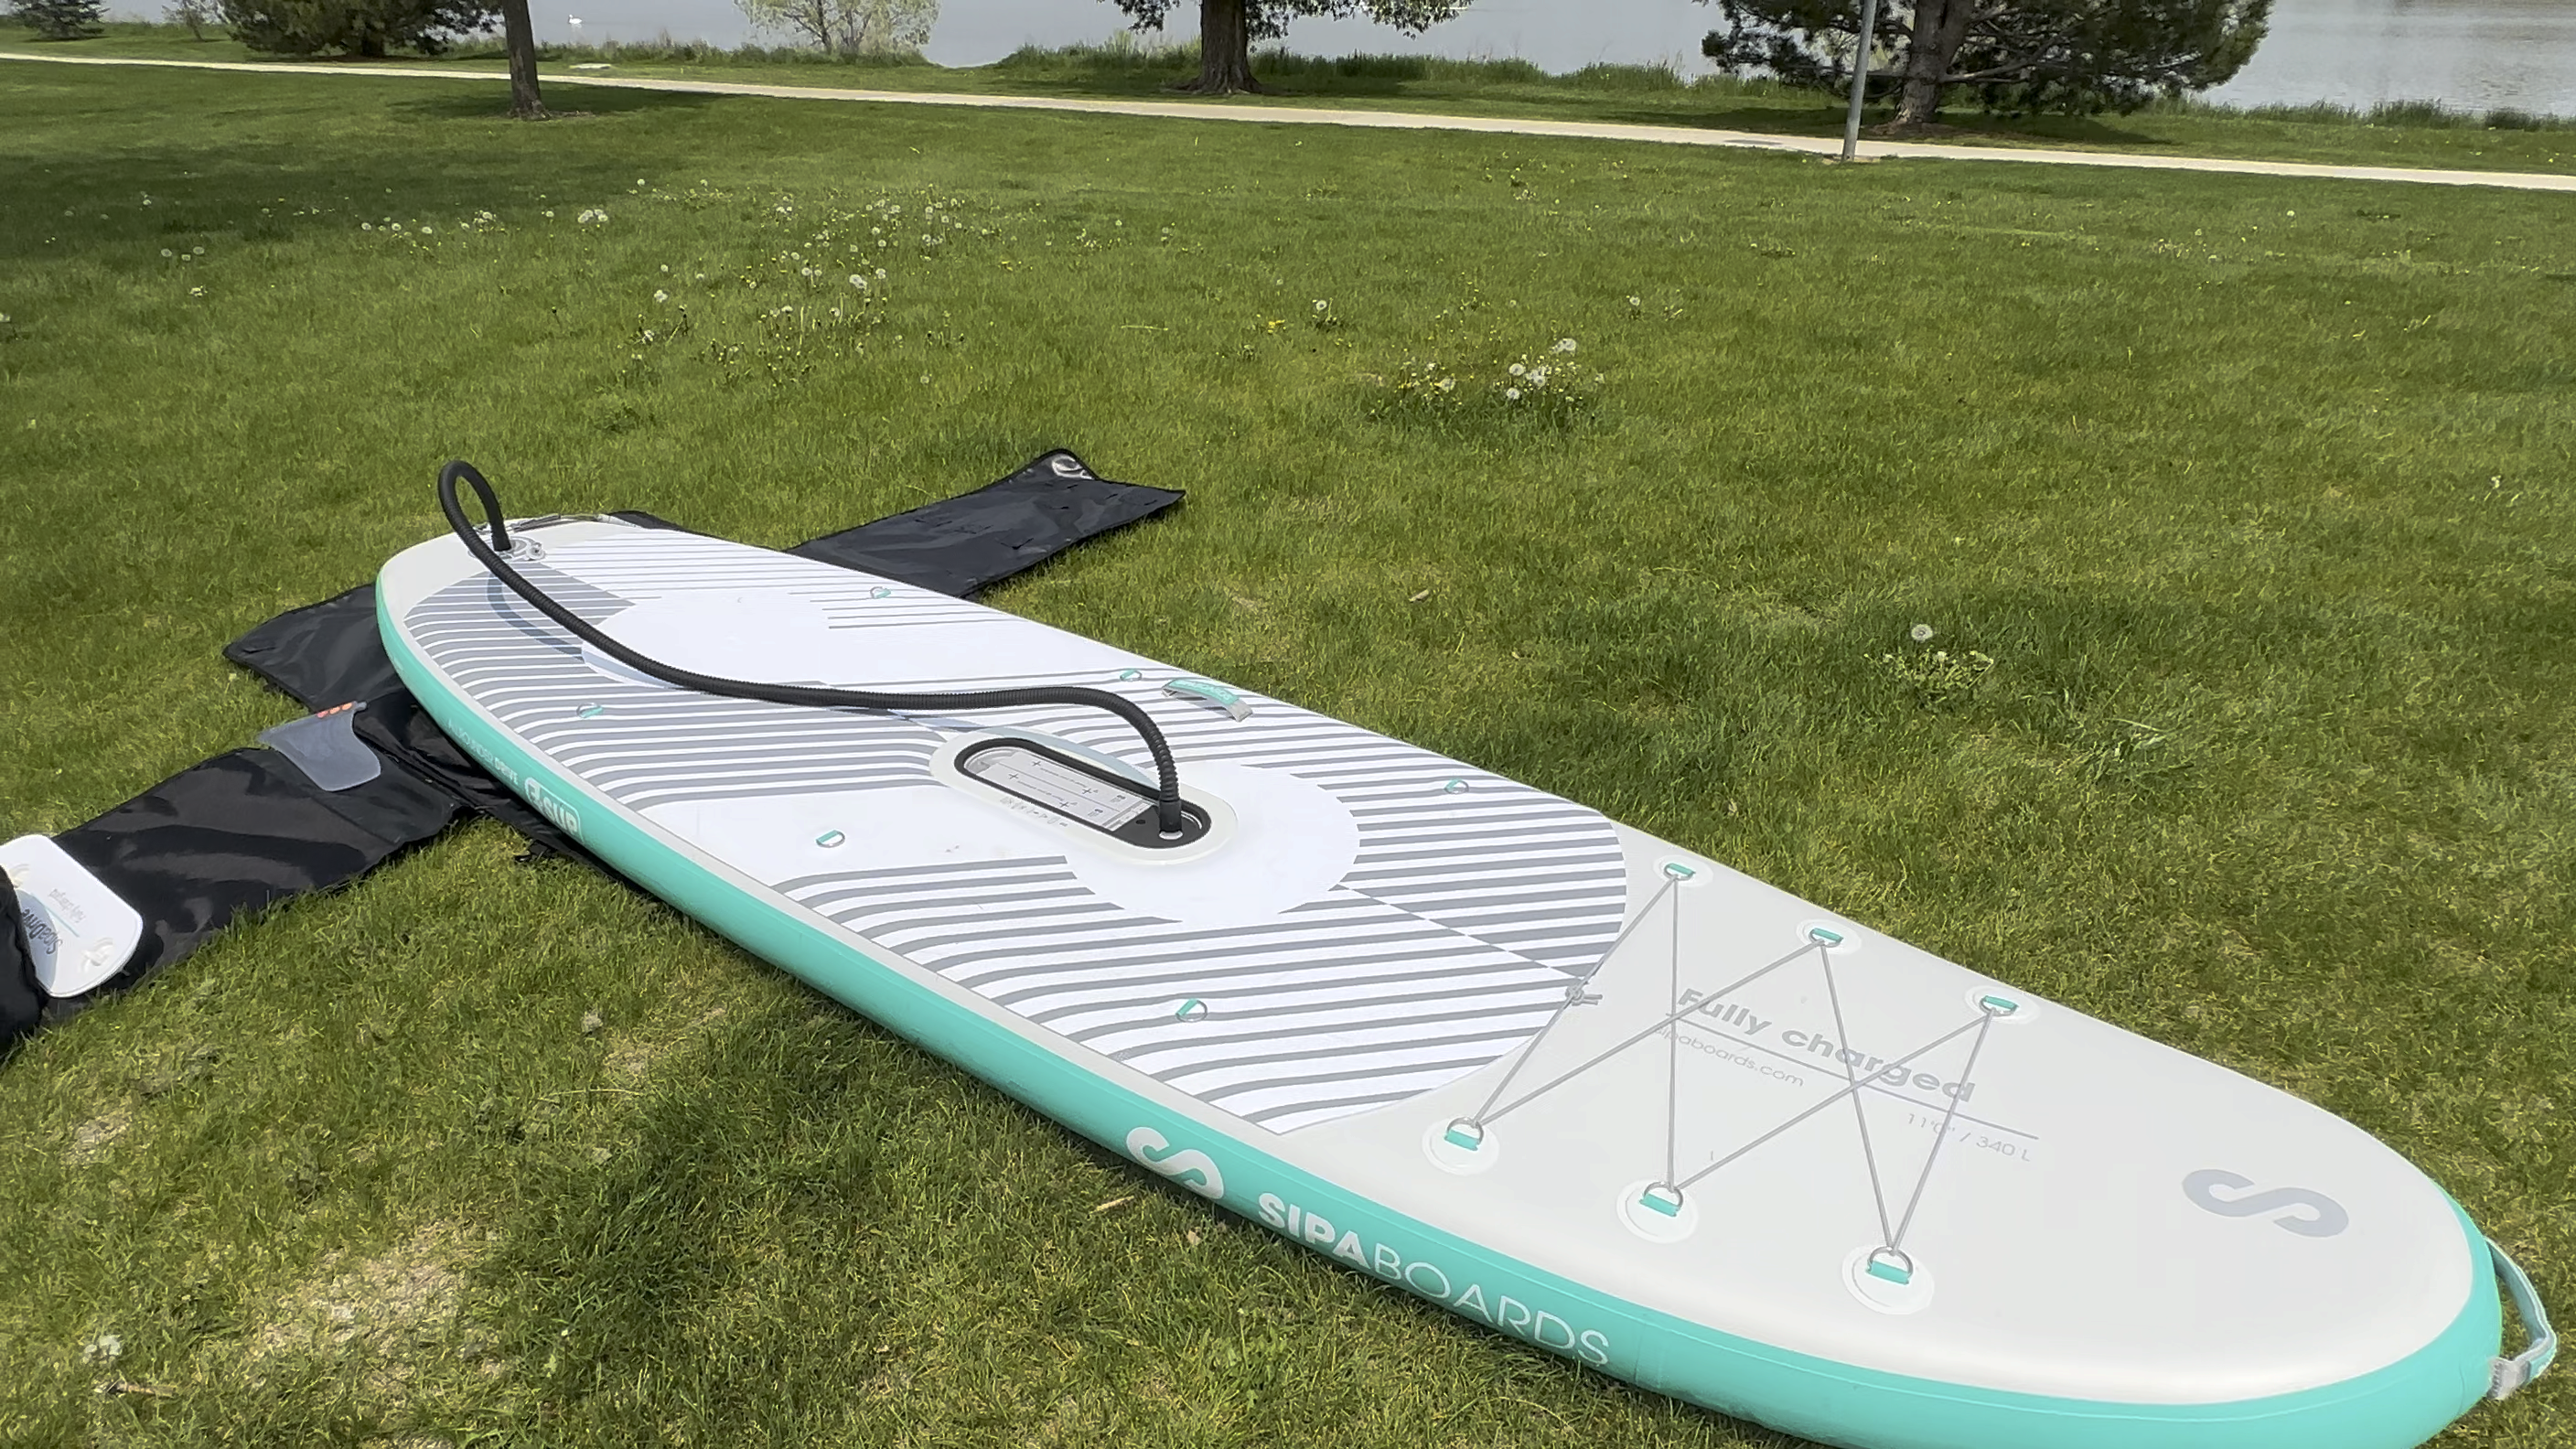 SipaBoards Drive Allrounder E-Paddle Paddleboard - Michael Clemente of Engearment.com